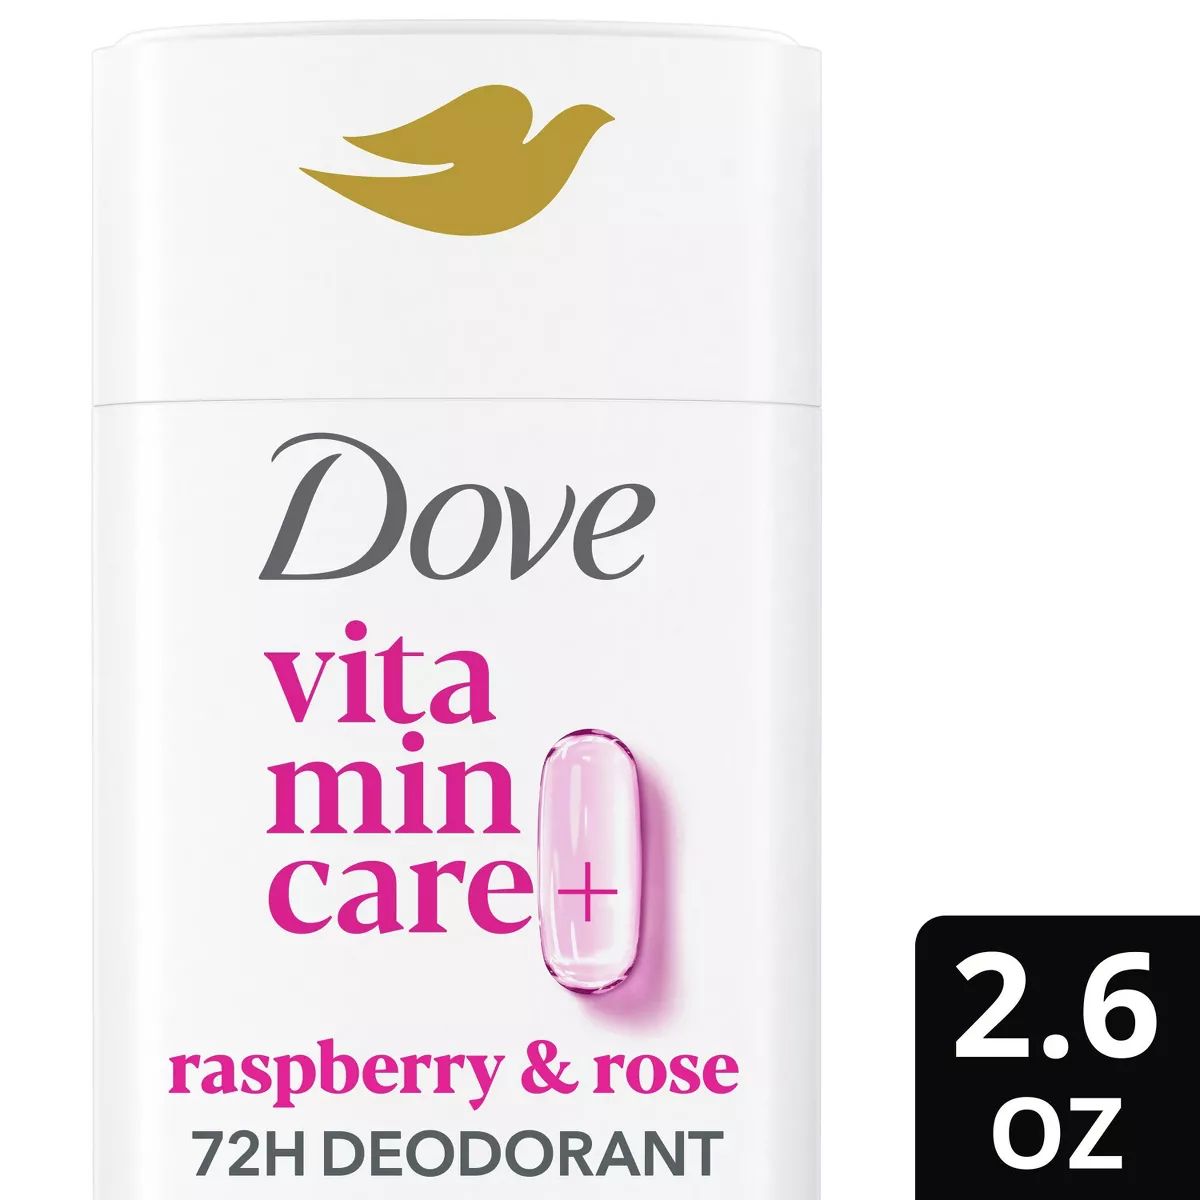 Dove Beauty Vitamin Care+ Raspberry and Rose Deo Stick - 2.6oz | Target